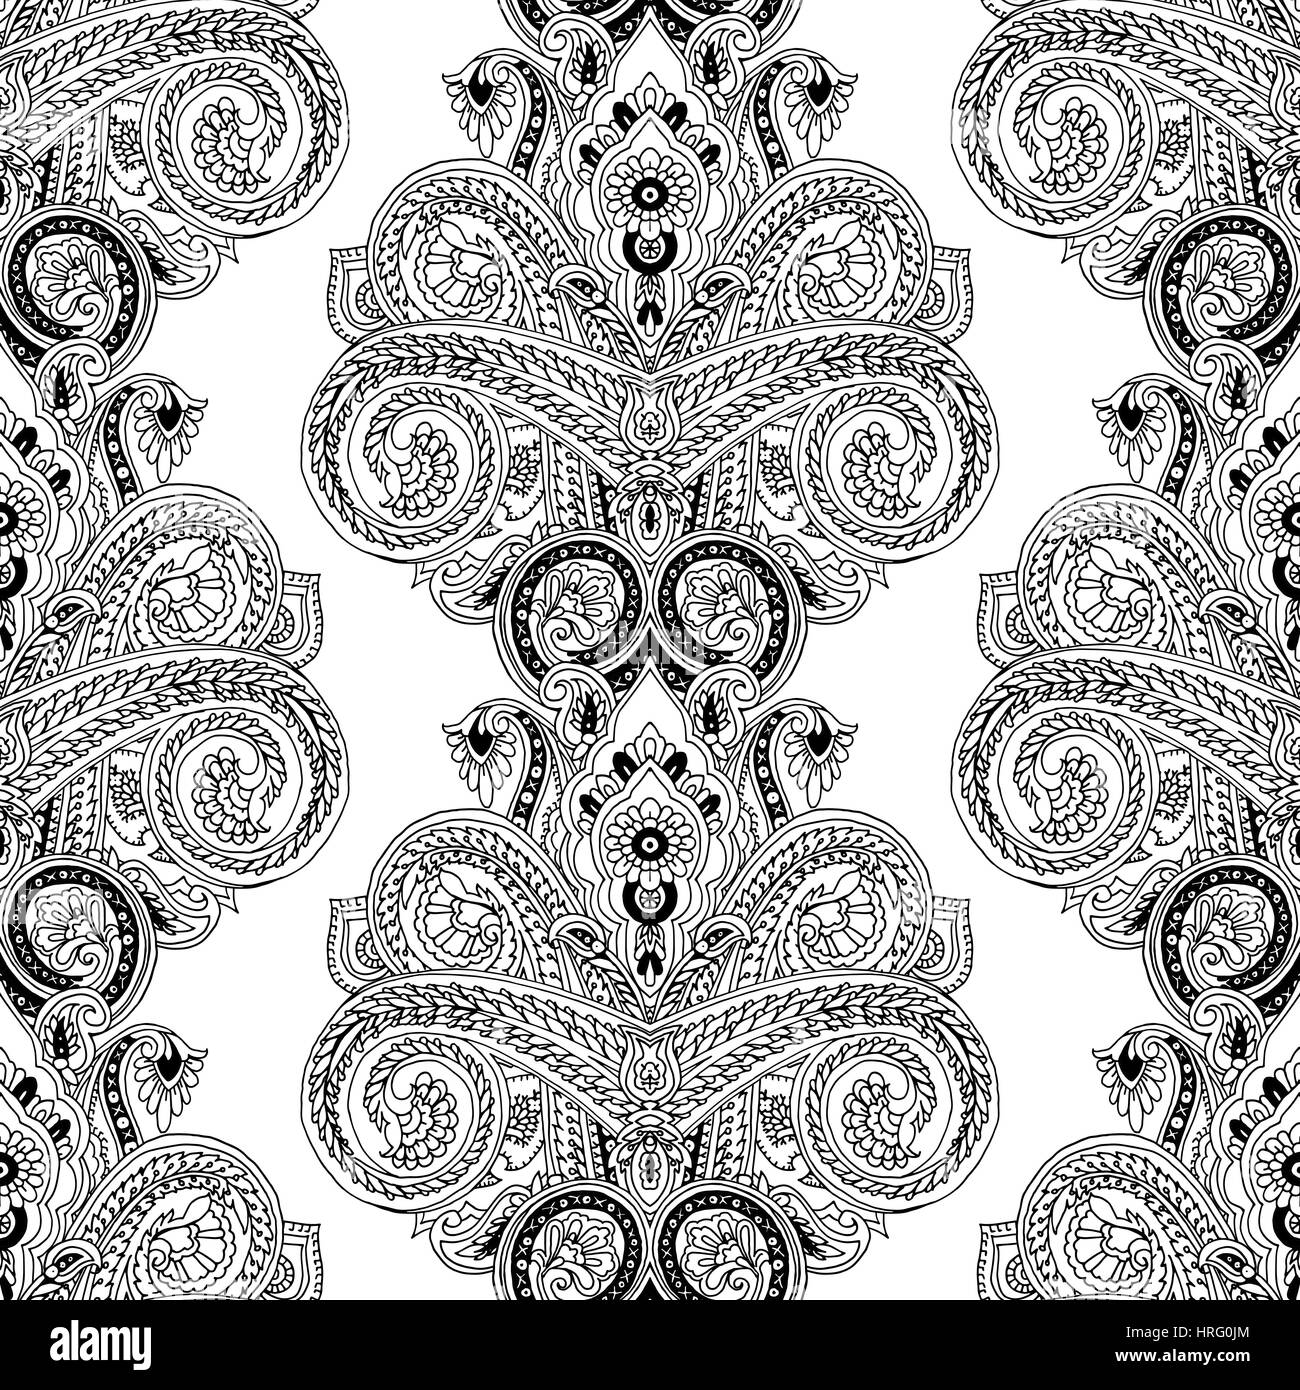 Abstract geometric seamless paisley pattern. Traditional oriental ethnic ornament, black outlines on white background. Textile design. Stock Vector